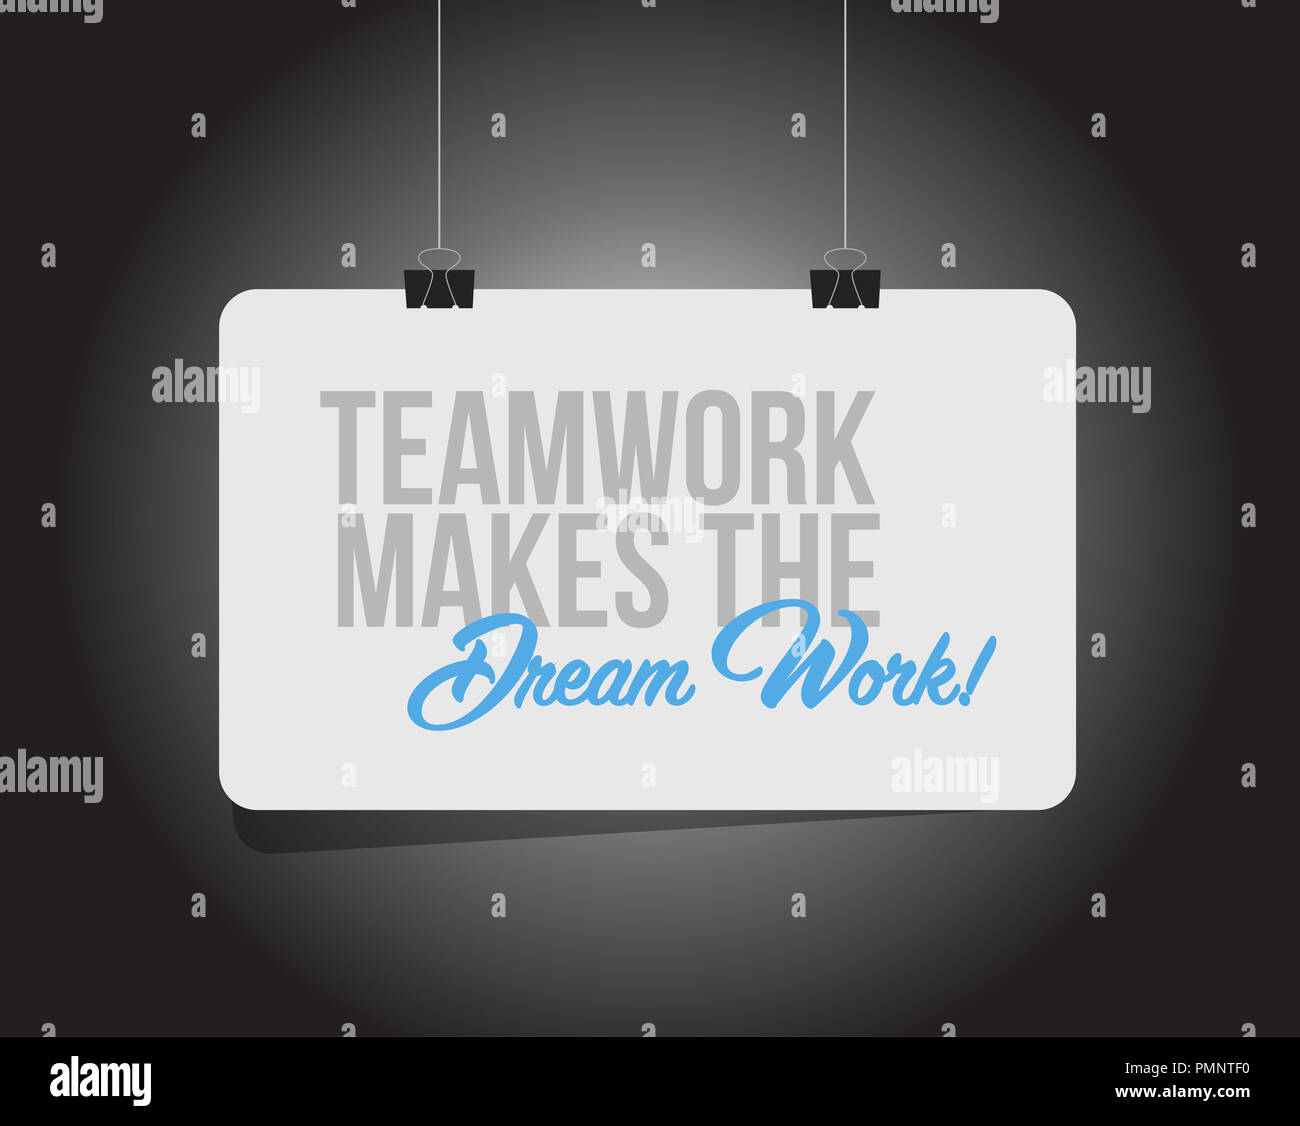 Teamwork makes the dream work hanging banner message  isolated over a black background Stock Photo